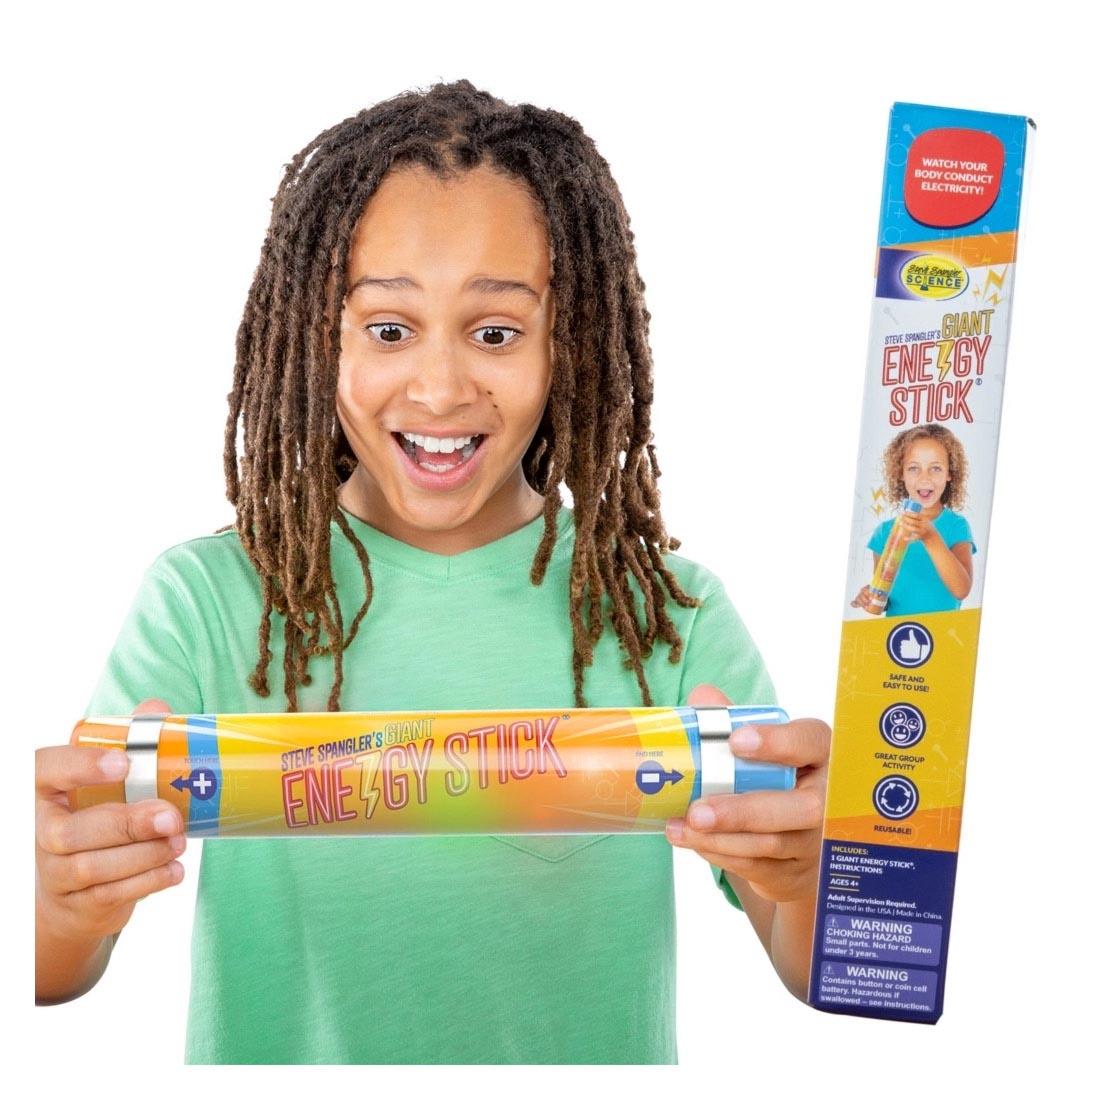 Child holding a Giant Energy Stick By Steve Spangler Science with a packaged one beside